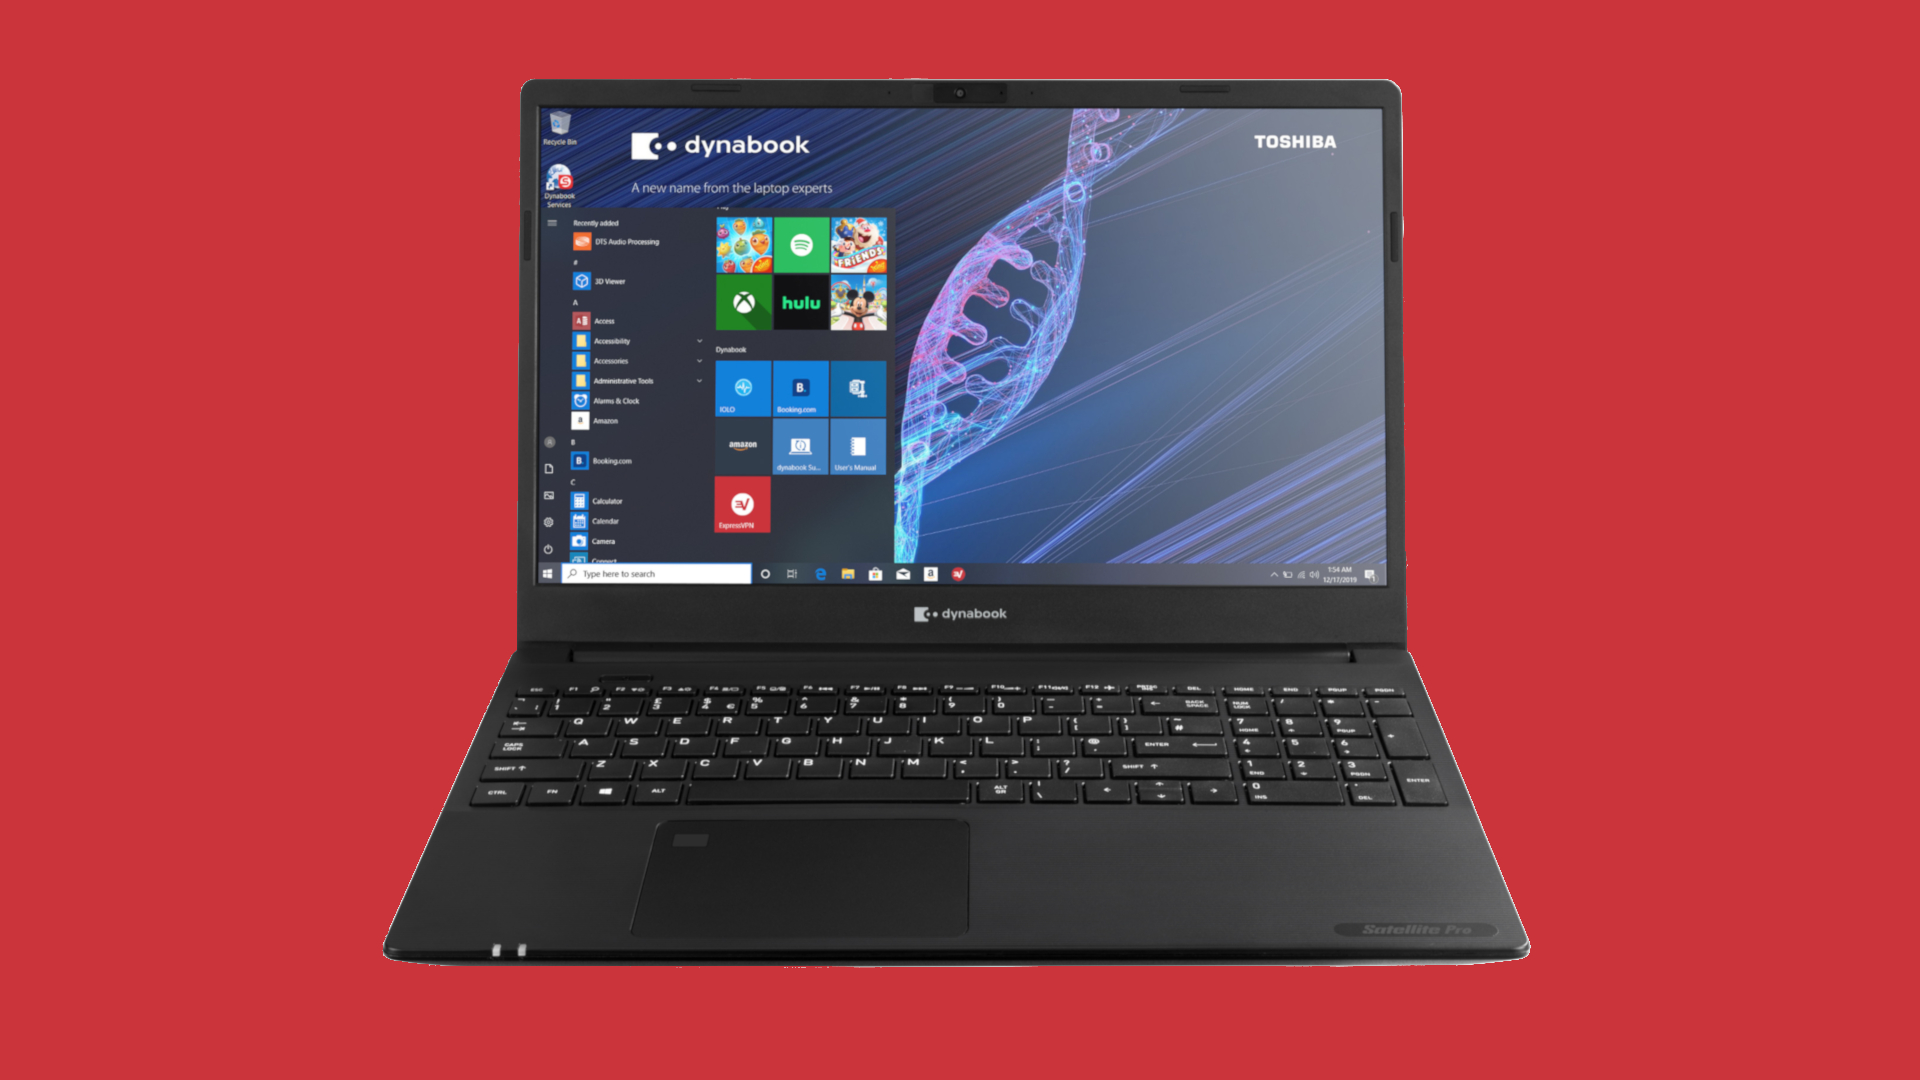 Expressvpn Will Now Come Pre Installed On All Dynabook Laptops Techradar